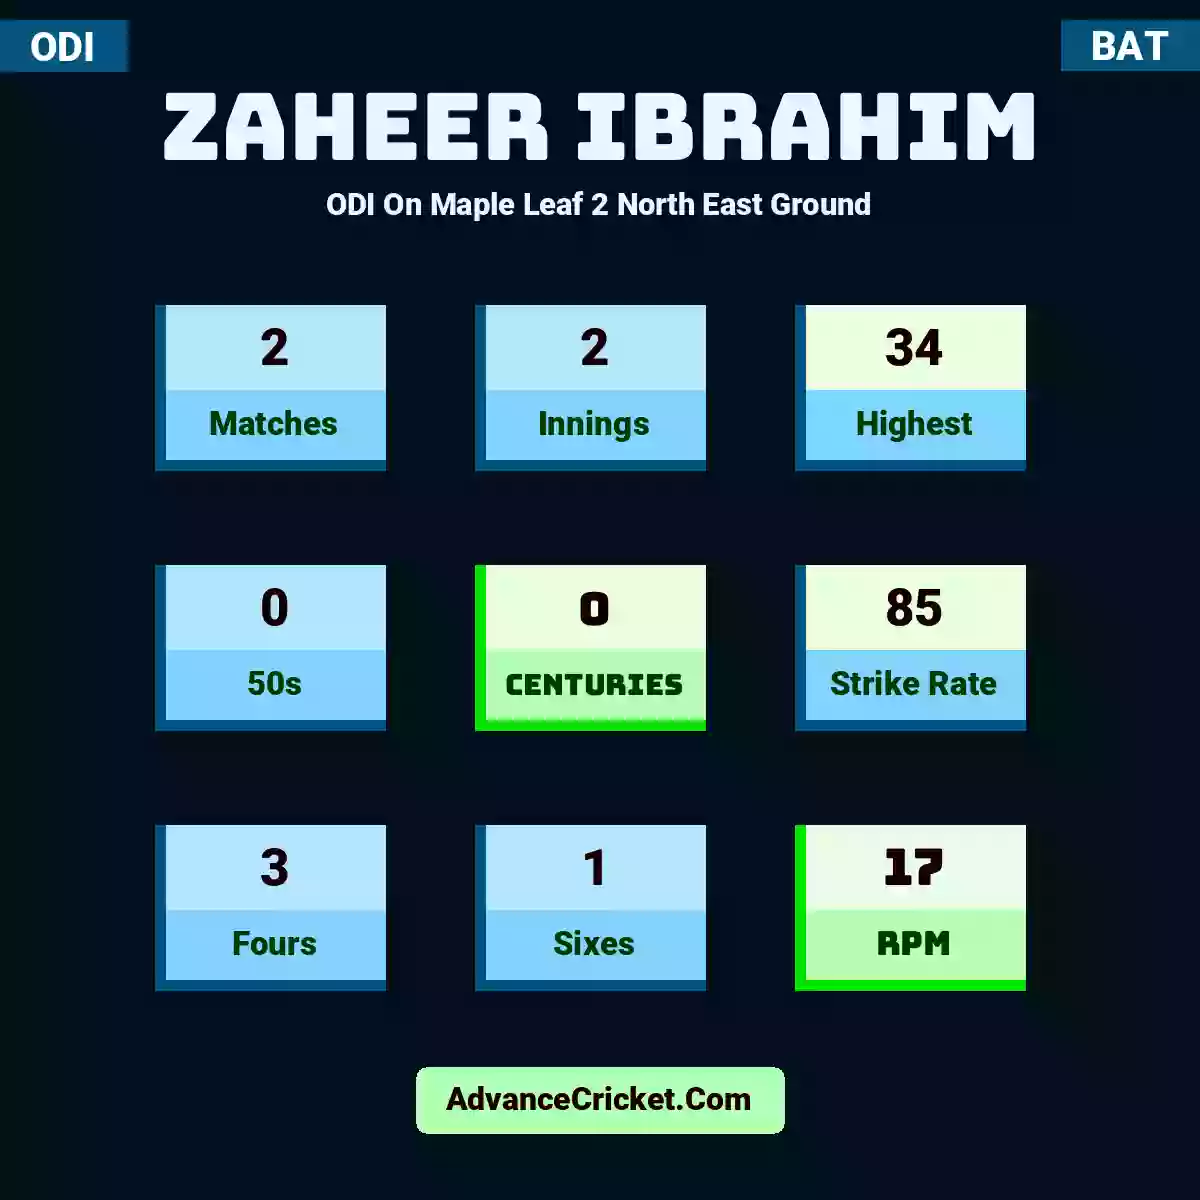 Zaheer Ibrahim ODI  On Maple Leaf 2 North East Ground, Zaheer Ibrahim played 2 matches, scored 34 runs as highest, 0 half-centuries, and 0 centuries, with a strike rate of 85. Z.Ibrahim hit 3 fours and 1 sixes, with an RPM of 17.